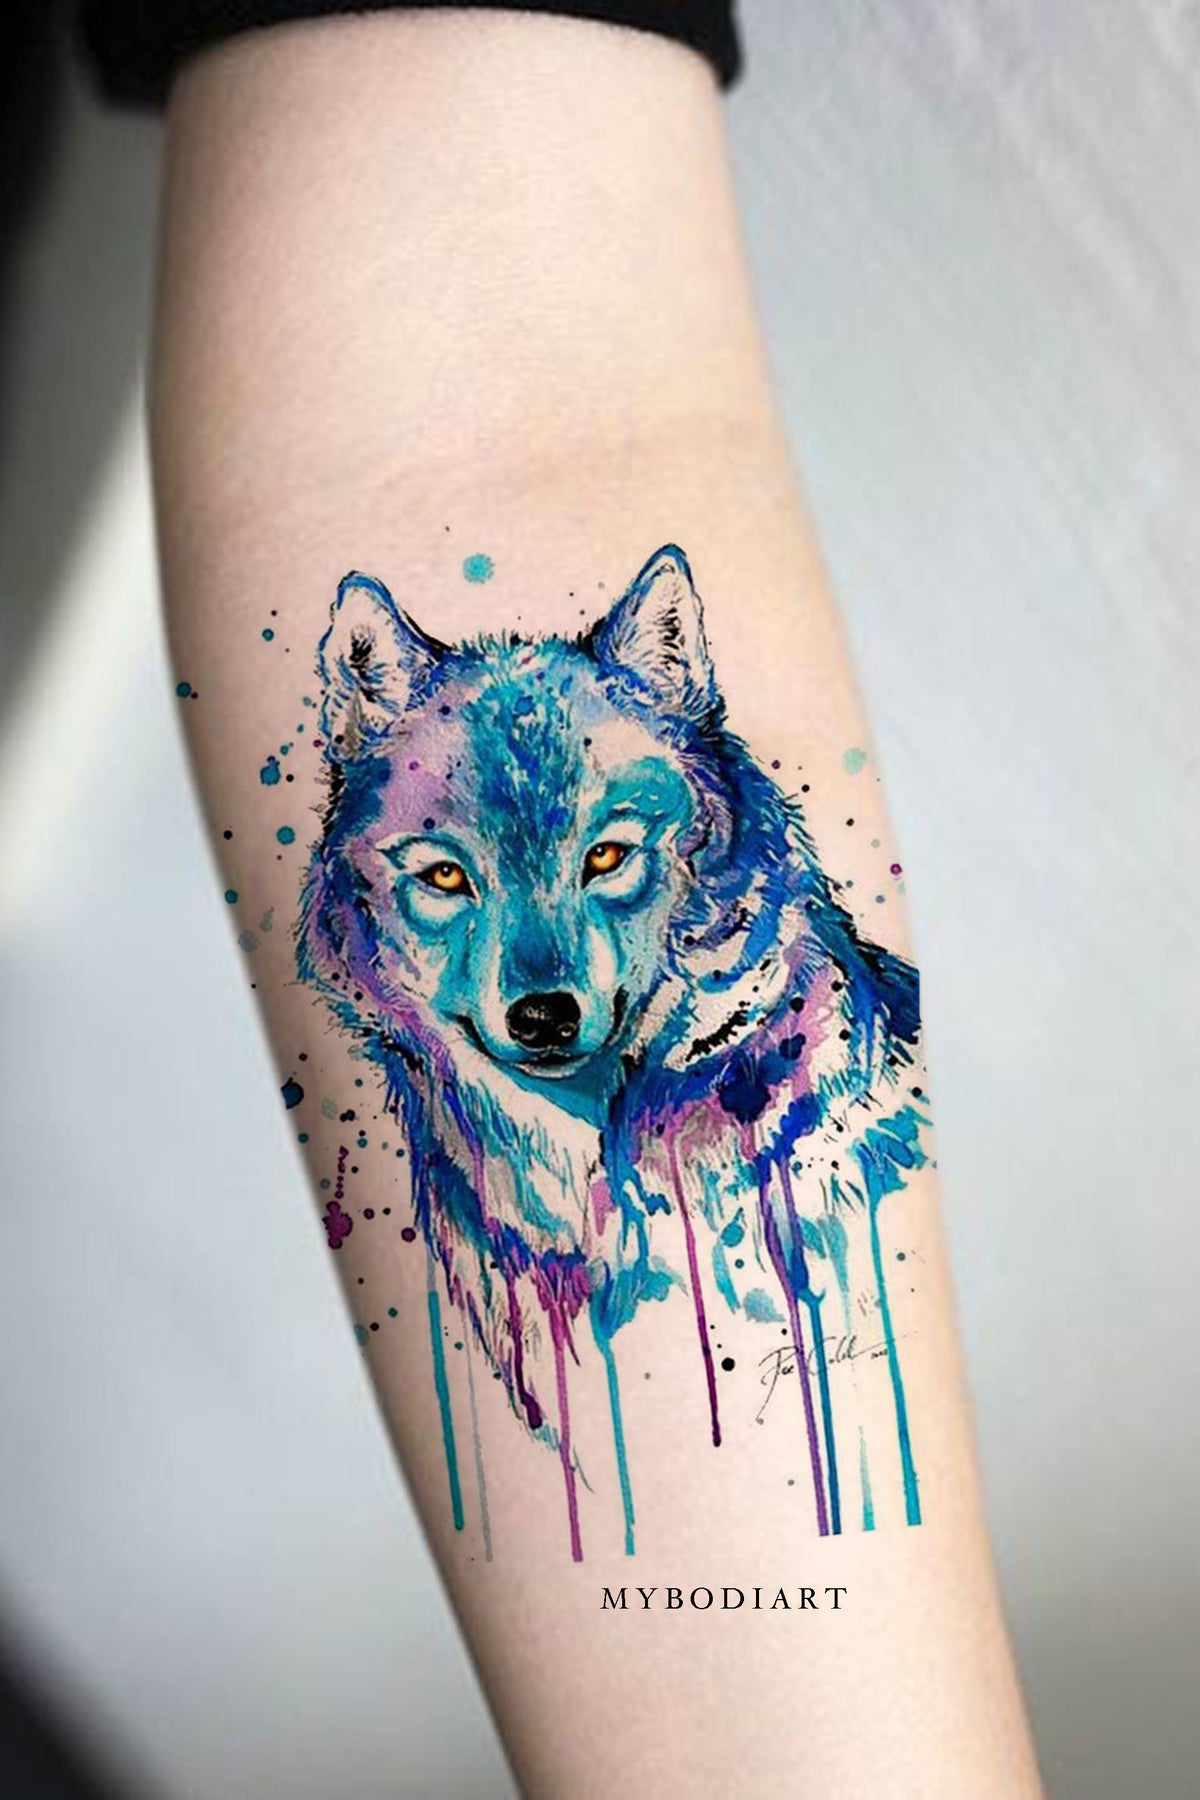 Tattoo watercolor wolf by CoconutCocaCola on DeviantArt